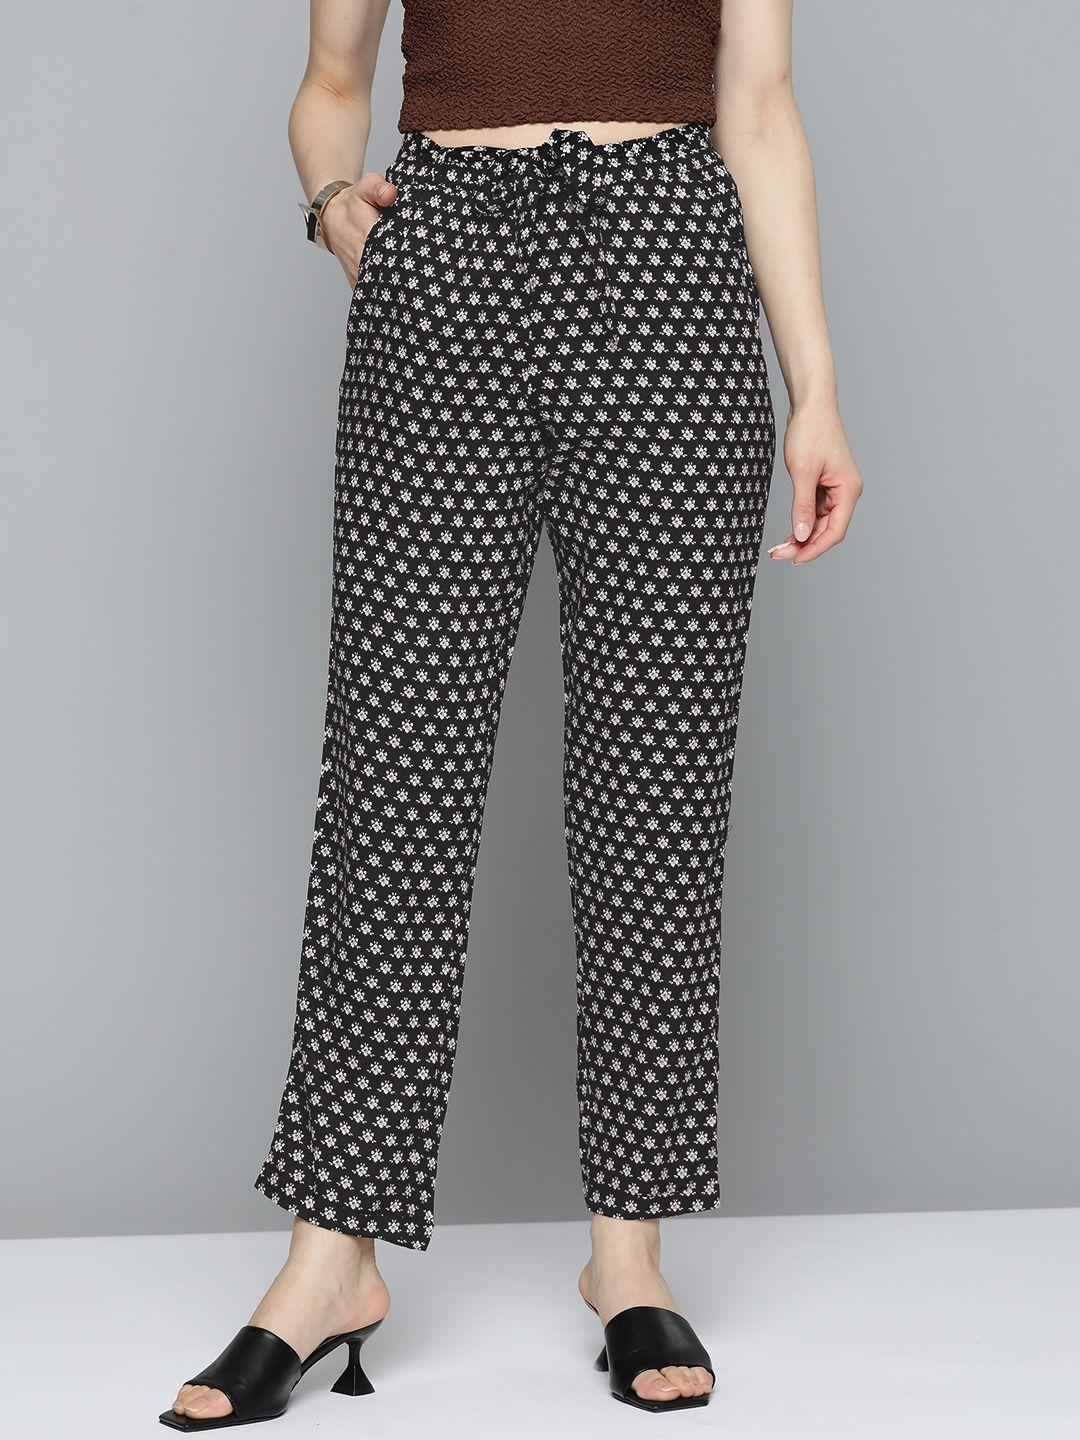 here&now women black floral printed trousers